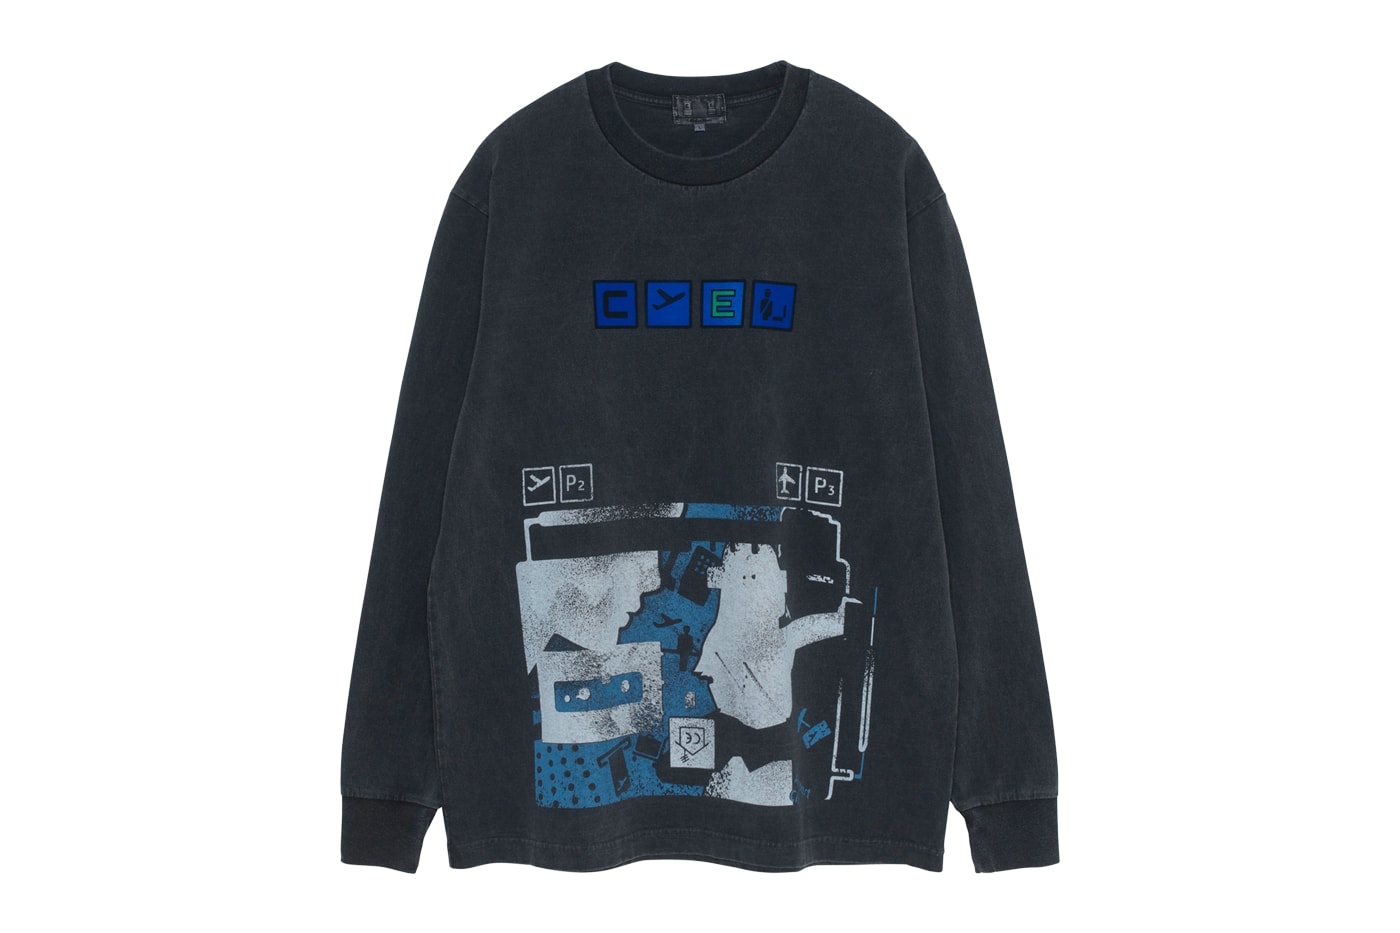 Cav Empt Drop 9 Spring/Summer 2020 Collection release info price details sk8thing toby feltwell TAPED PANEL ZIP SWEAT VELVET PULLOVER SHIRT WAVE STRIPE ANORAK OVERDYE FLIGHT LONG SLEEVE T STRIPE STAND COLLAR SWEAT MD The WAVE STRIPE CHINO SHORTS  SUPERMERCADO CAP TotalObject T IN-PAT PANTS SOLID SEAM JOG PANTS